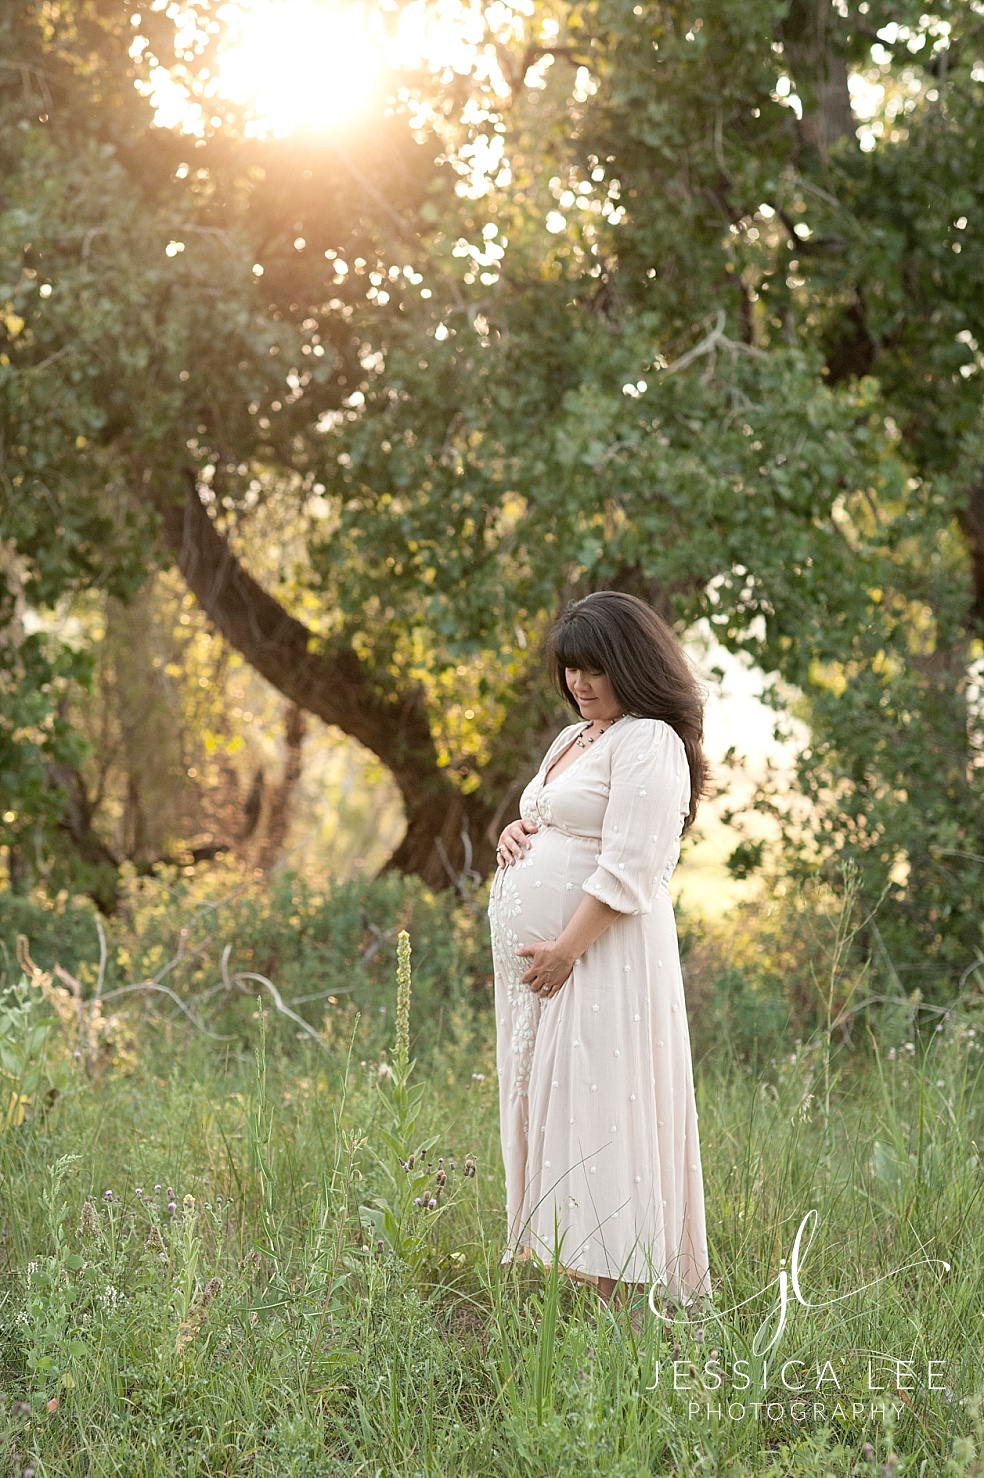 Maternity photo in Tall Grass with Sunburst | Jessica Lee Photography